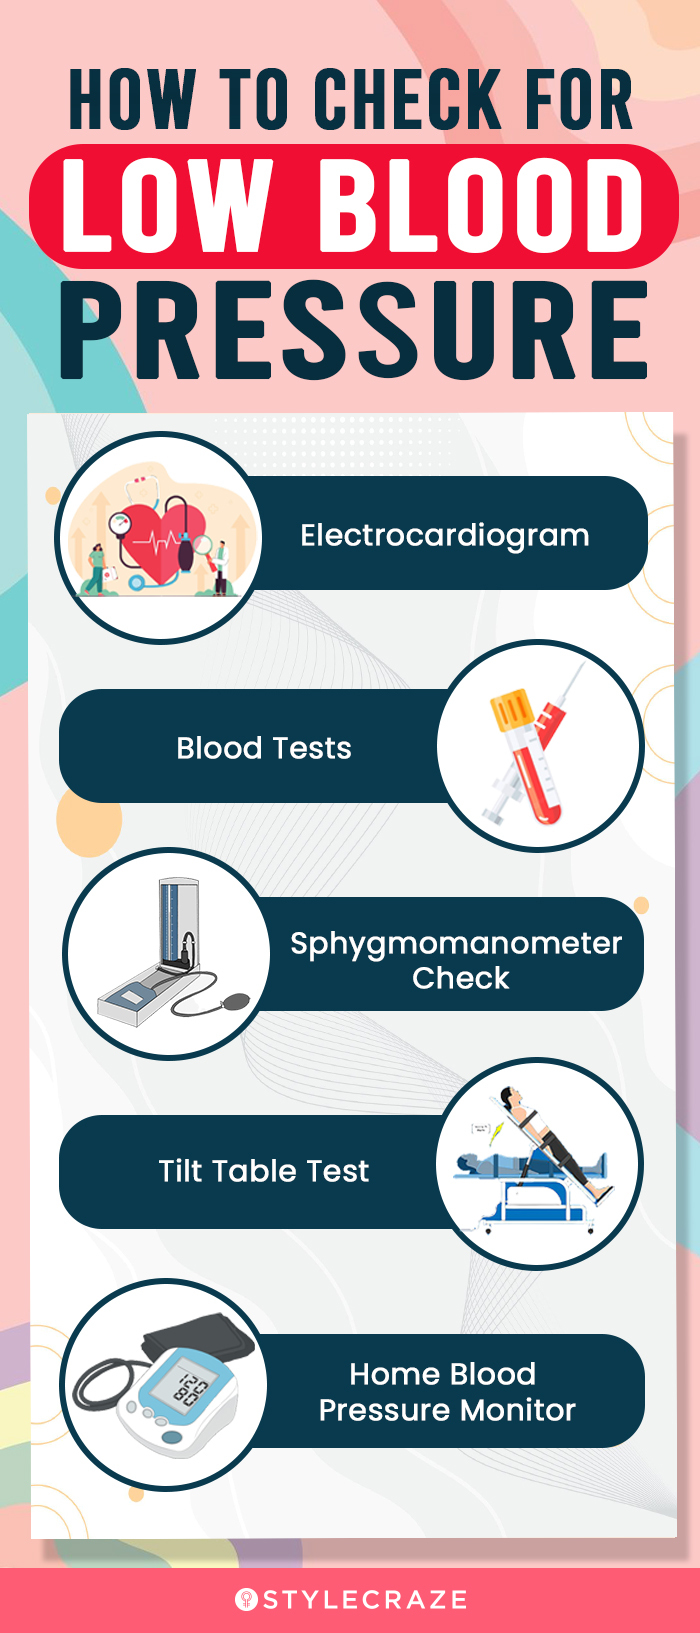 how to check for low blood pressure [infographic]